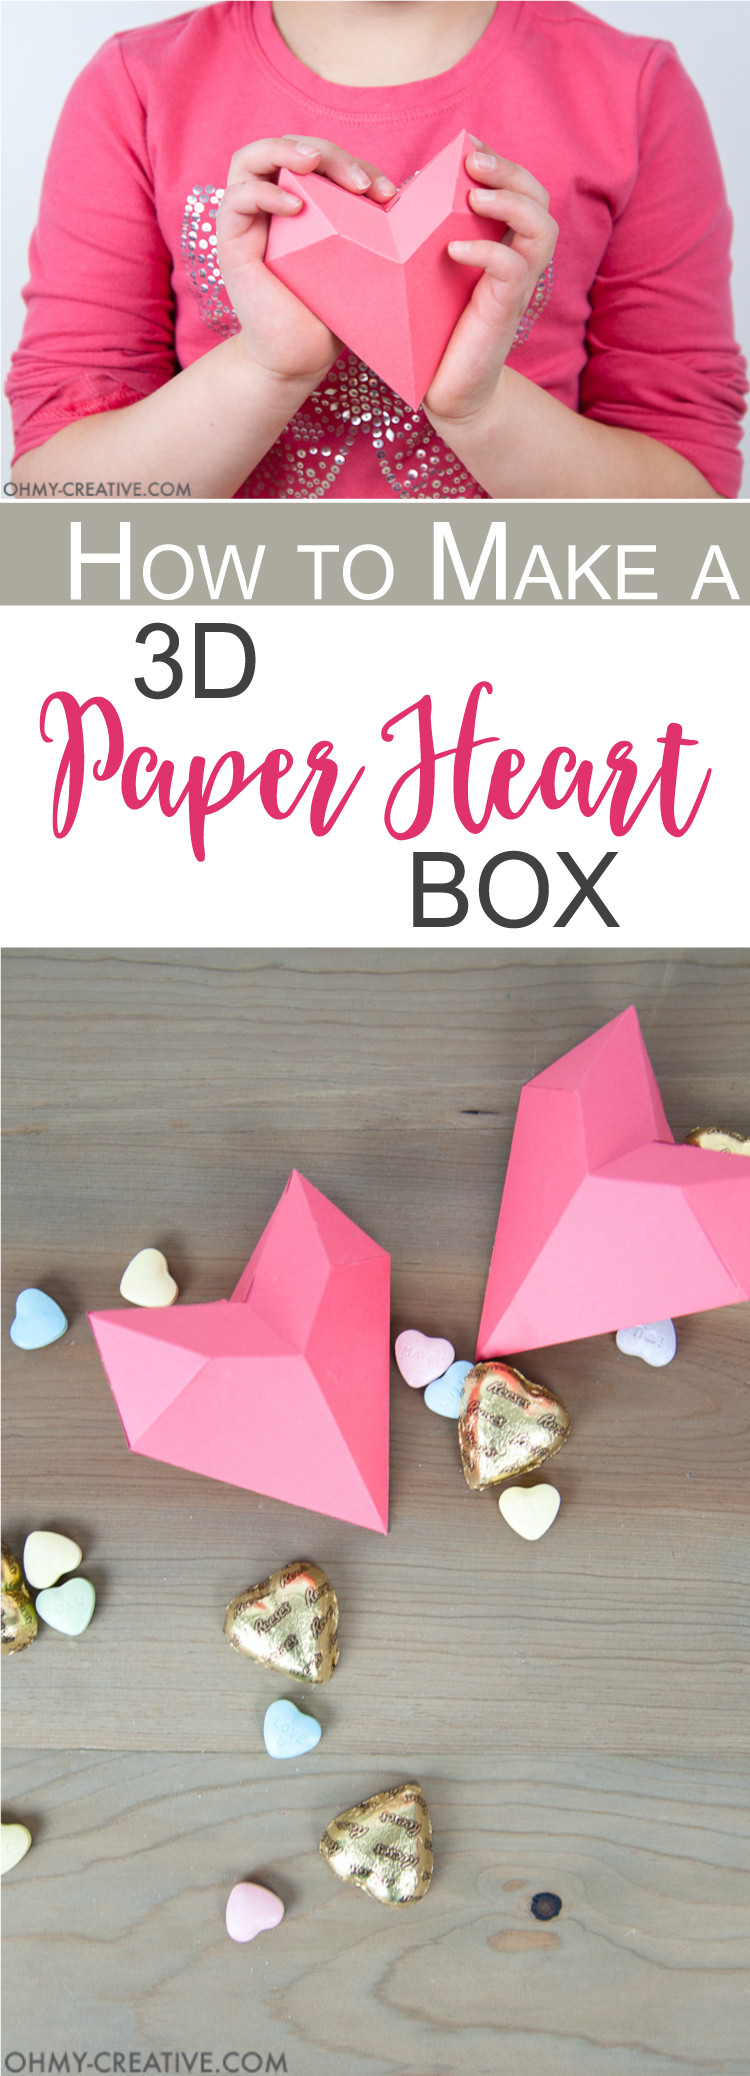 Free Valentines Day Ideas
 How to Make a 3D Paper Heart Box Oh My Creative